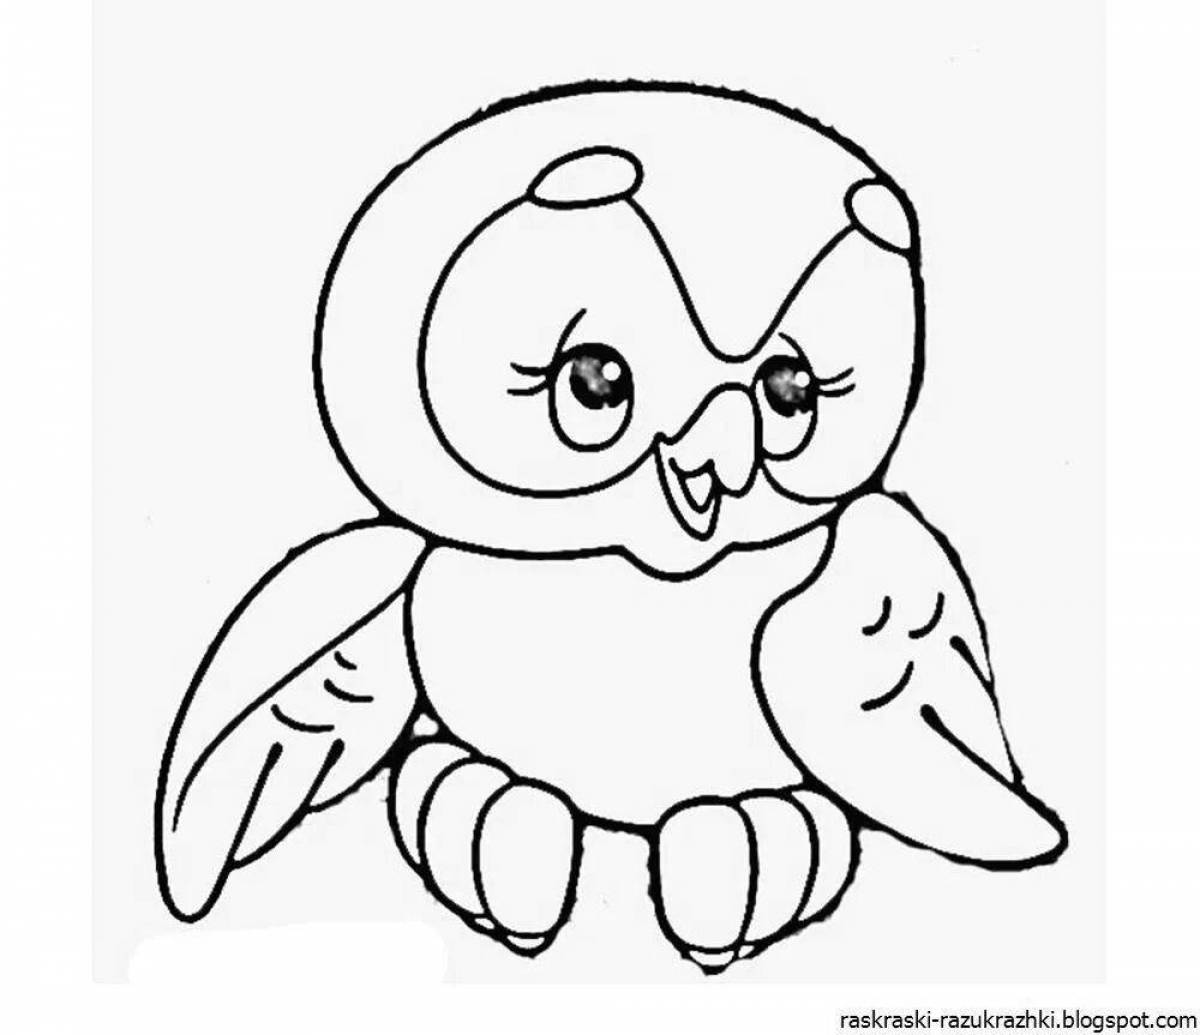 Glamorous owlet coloring for juniors